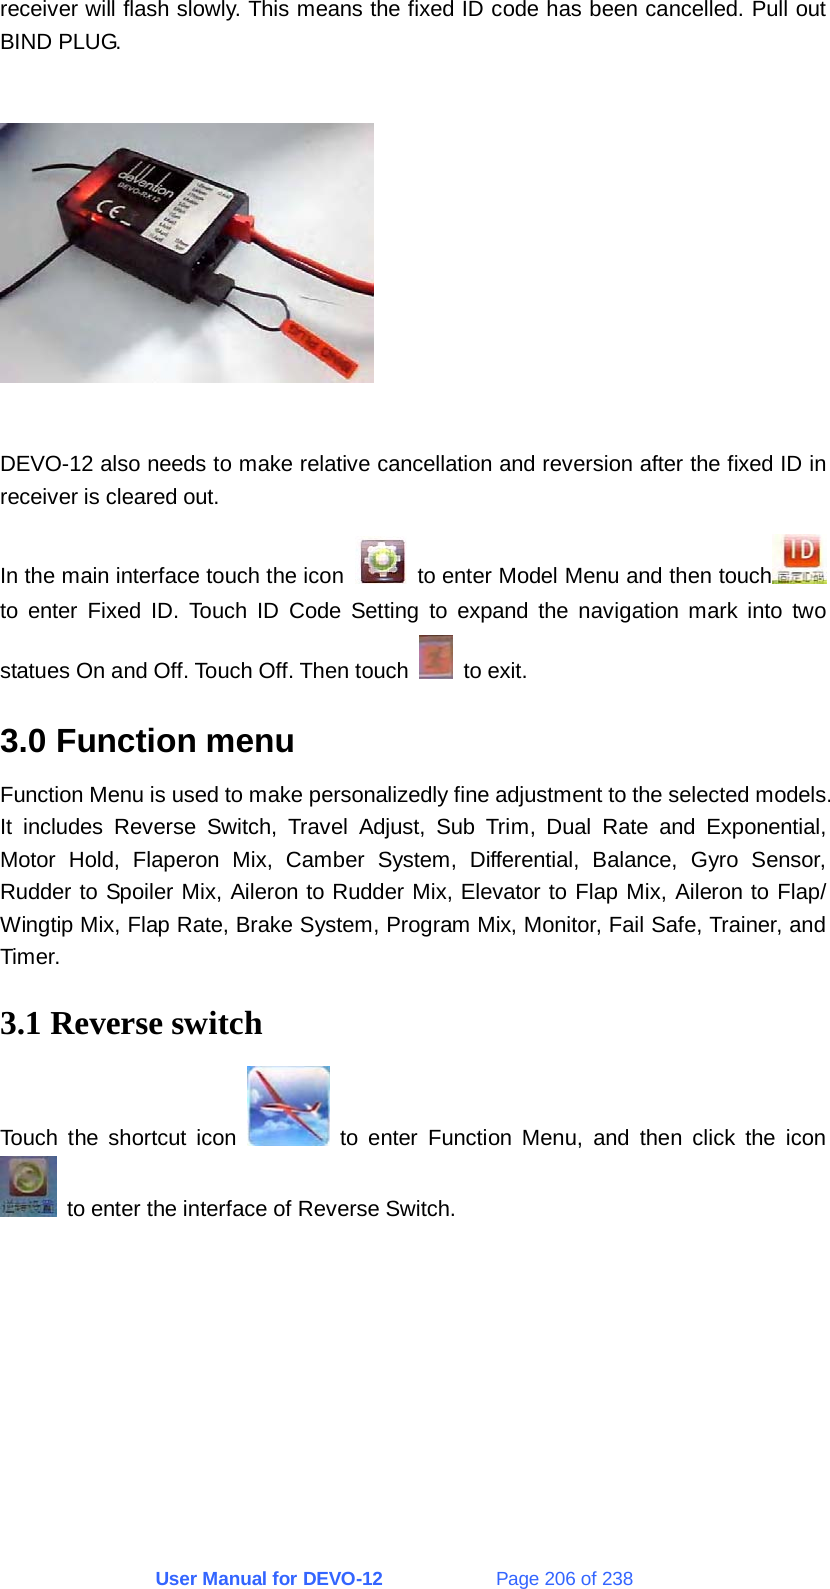 User Manual for DEVO-12             Page 206 of 238 receiver will flash slowly. This means the fixed ID code has been cancelled. Pull out BIND PLUG.    DEVO-12 also needs to make relative cancellation and reversion after the fixed ID in receiver is cleared out. In the main interface touch the icon    to enter Model Menu and then touch  to enter Fixed ID. Touch ID Code Setting to expand the navigation mark into two statues On and Off. Touch Off. Then touch   to exit. 3.0 Function menu Function Menu is used to make personalizedly fine adjustment to the selected models. It includes Reverse Switch, Travel Adjust, Sub Trim, Dual Rate and Exponential, Motor Hold, Flaperon Mix, Camber System, Differential, Balance, Gyro Sensor, Rudder to Spoiler Mix, Aileron to Rudder Mix, Elevator to Flap Mix, Aileron to Flap/ Wingtip Mix, Flap Rate, Brake System, Program Mix, Monitor, Fail Safe, Trainer, and Timer. 3.1 Reverse switch Touch the shortcut icon   to enter Function Menu, and then click the icon   to enter the interface of Reverse Switch. 